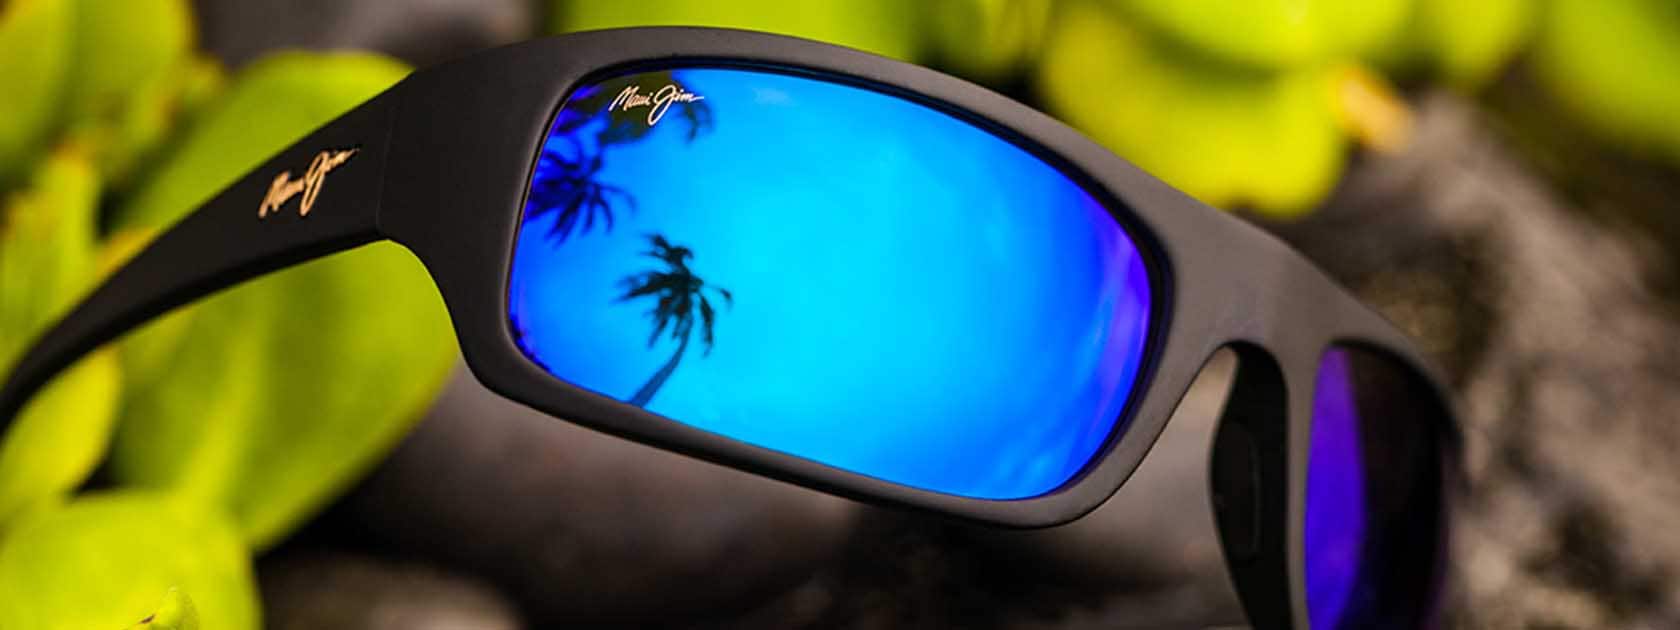 matte black frame sunglasses with blue lenses displayed on green tropical leaves